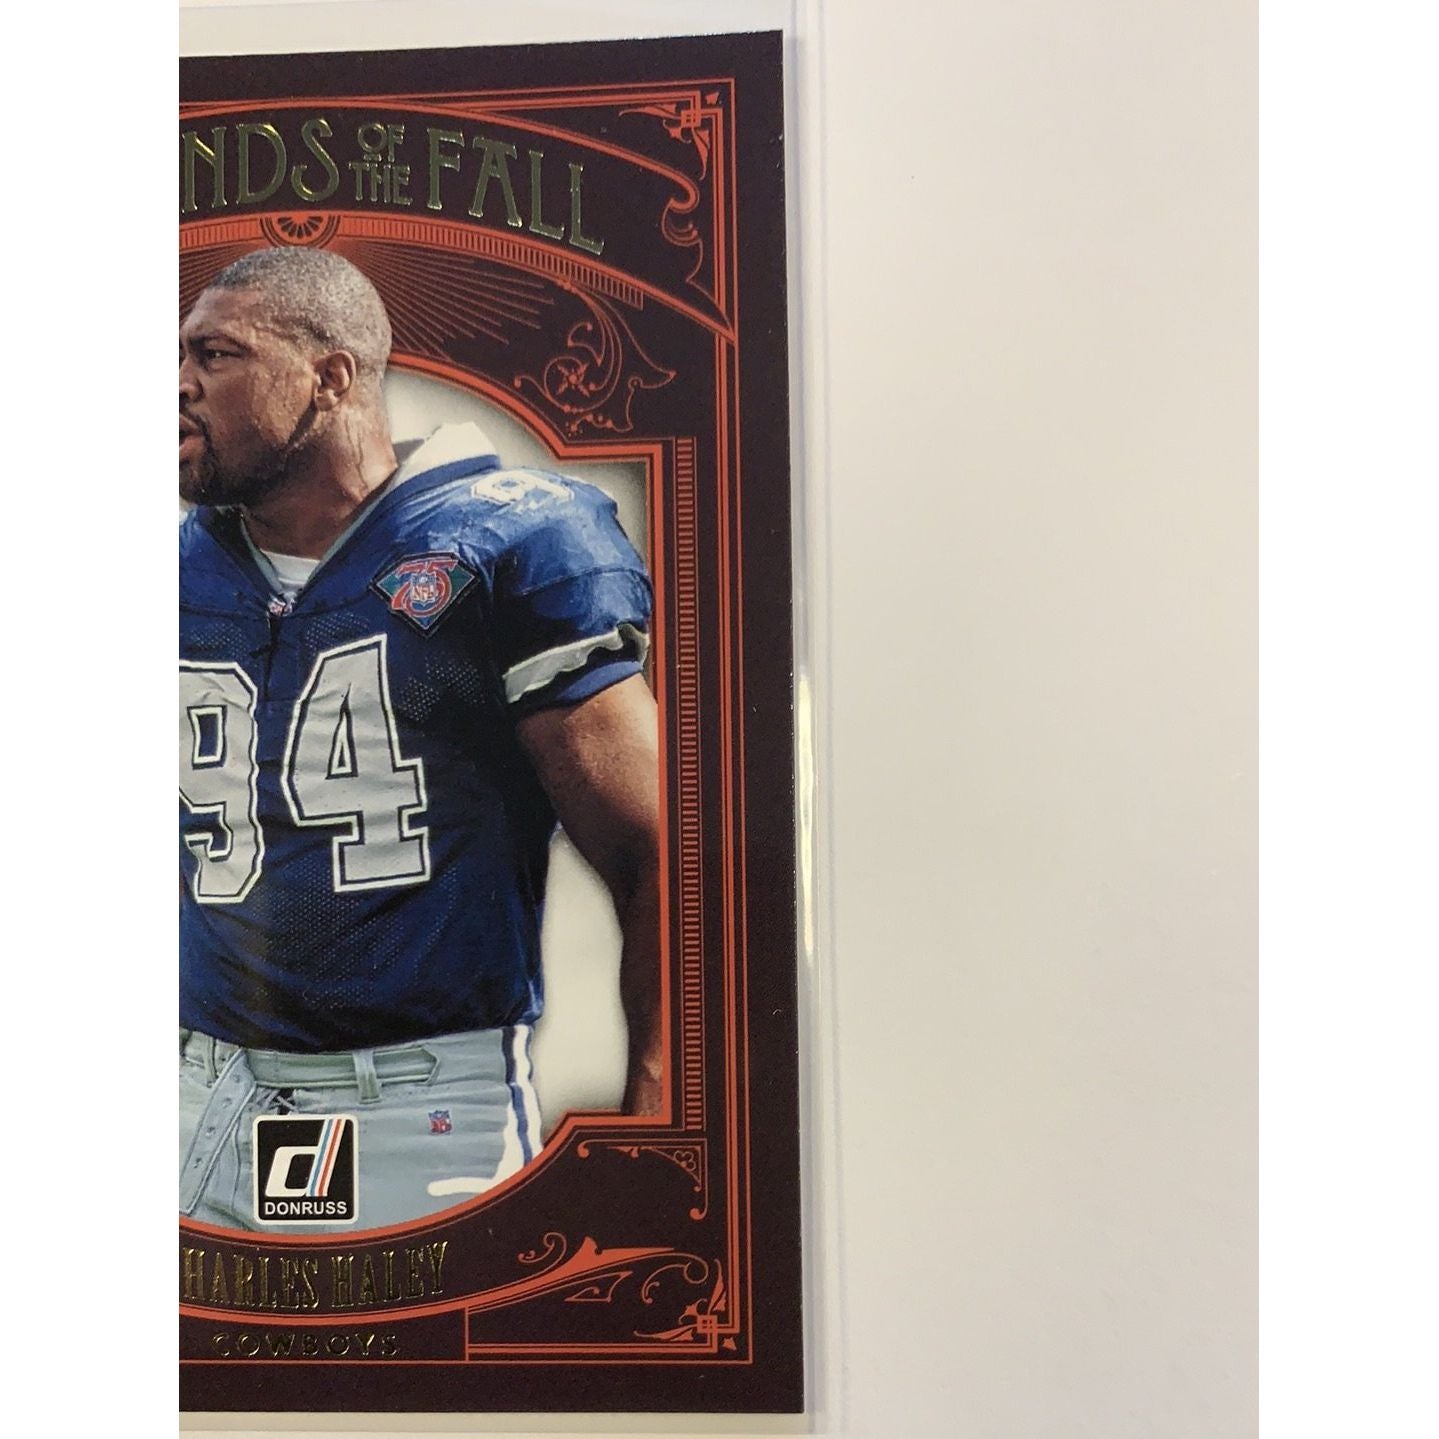  2020 Donruss Charles Haley Legends of the Fall  Local Legends Cards & Collectibles